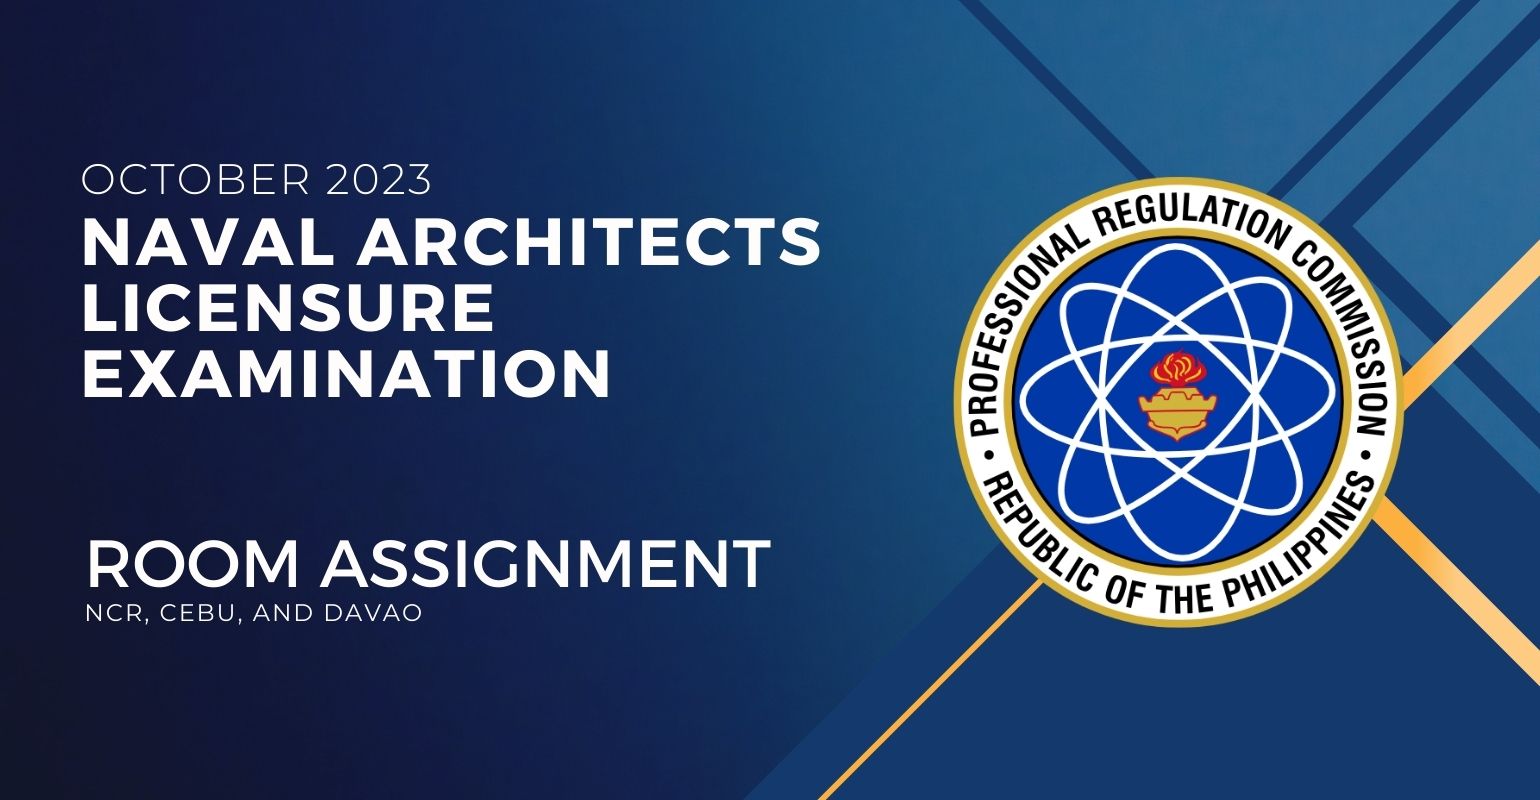 room assignment october 2023 naval architects licensure exam